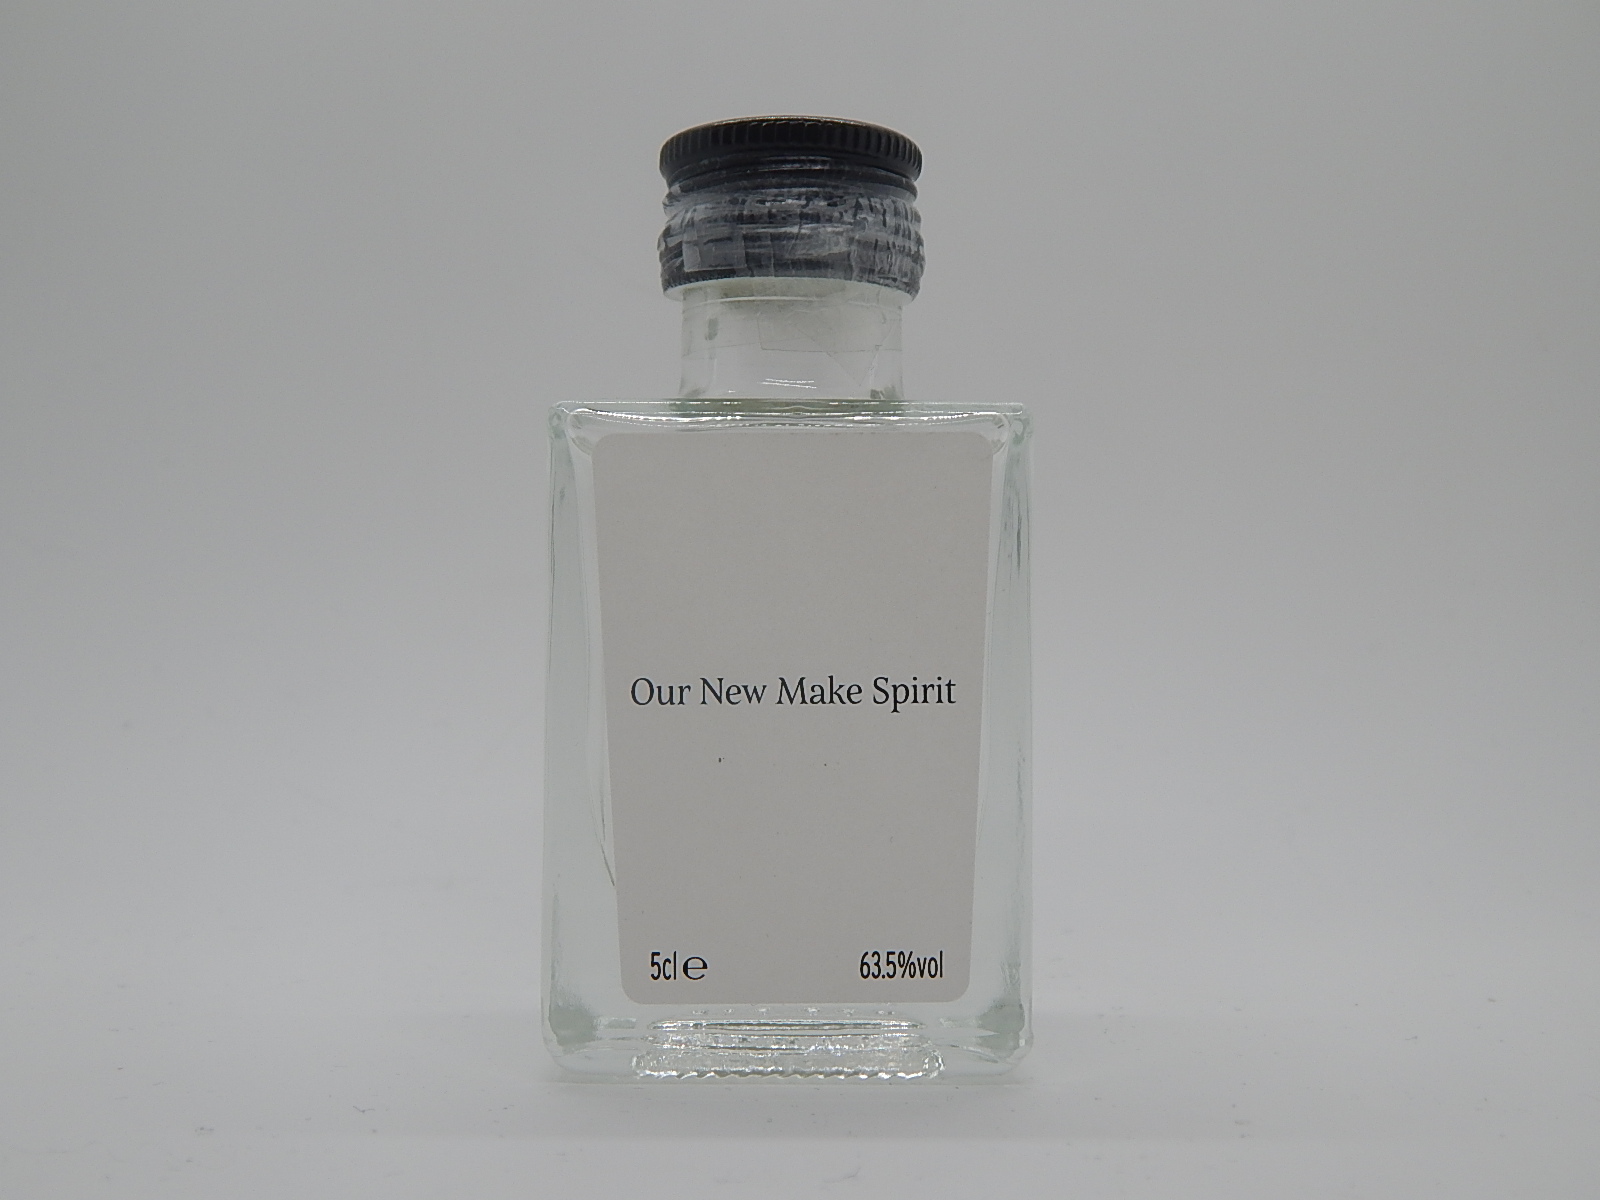 Our New Make Spirit  5cle  63,5%vol